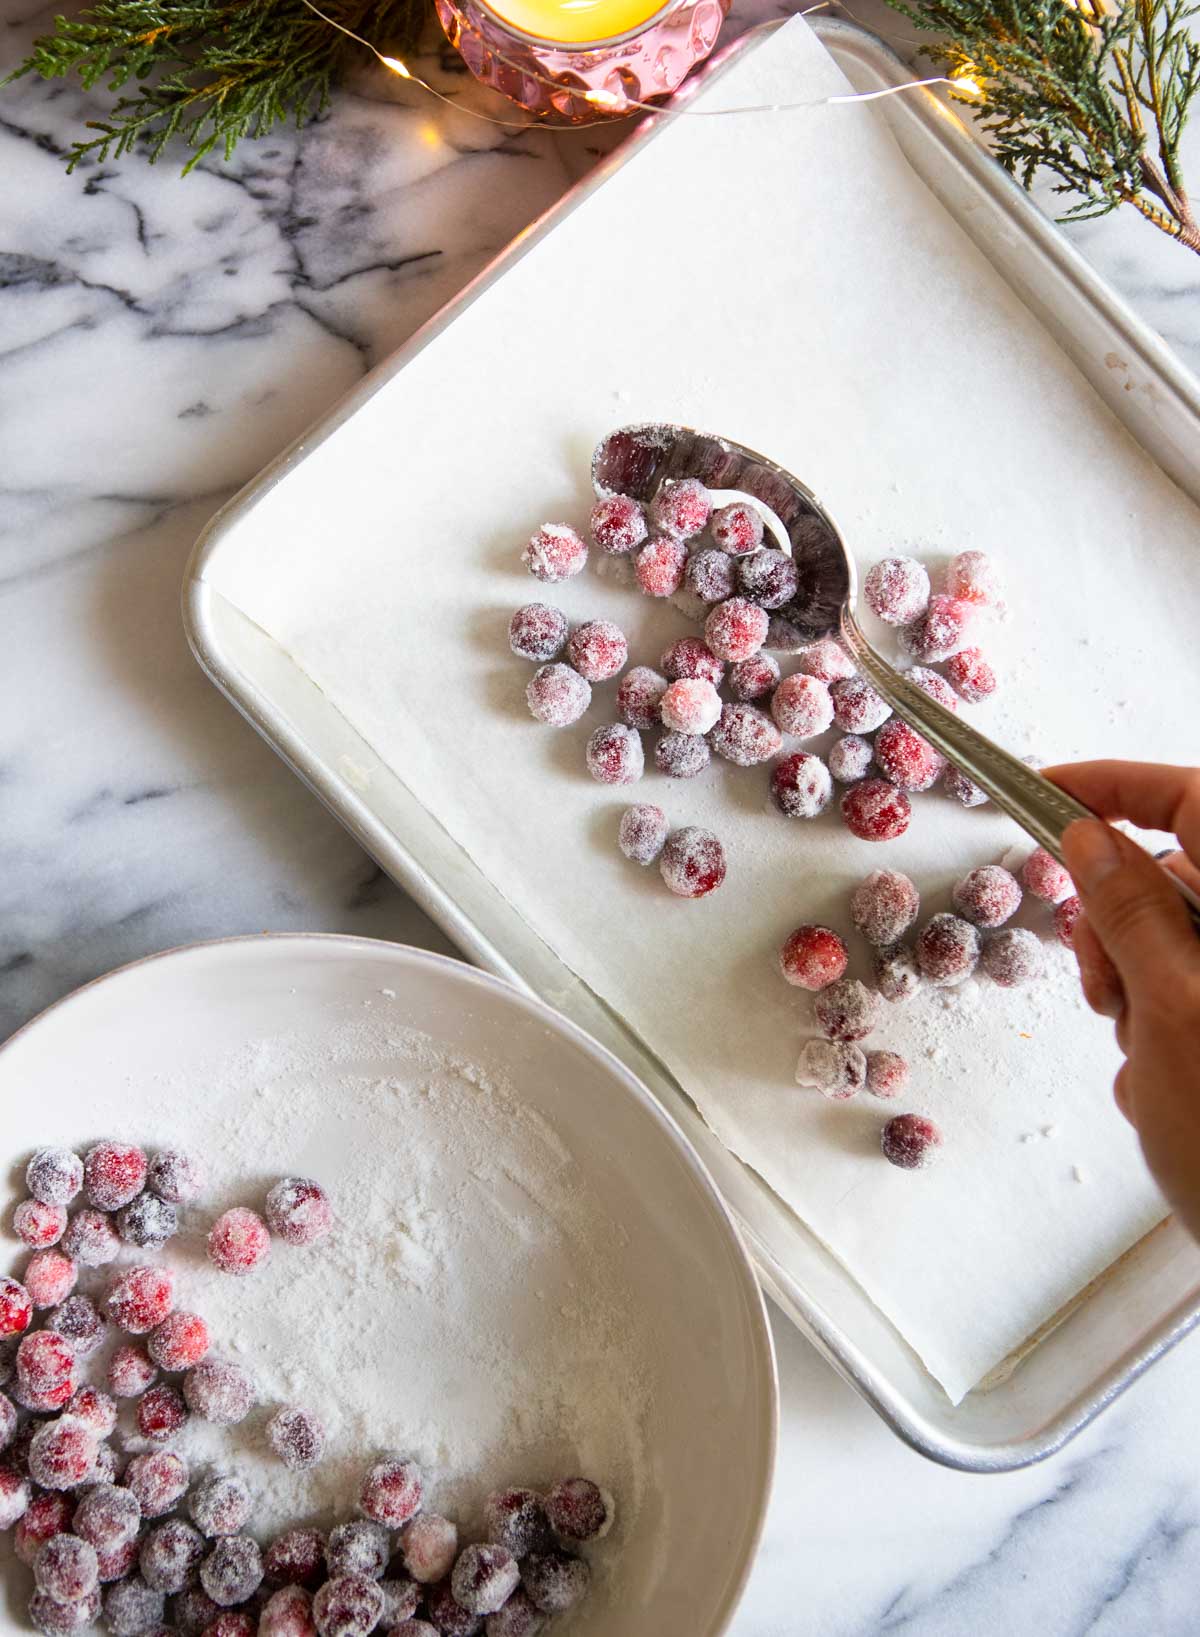 sugared cranberries placed on a baking tray